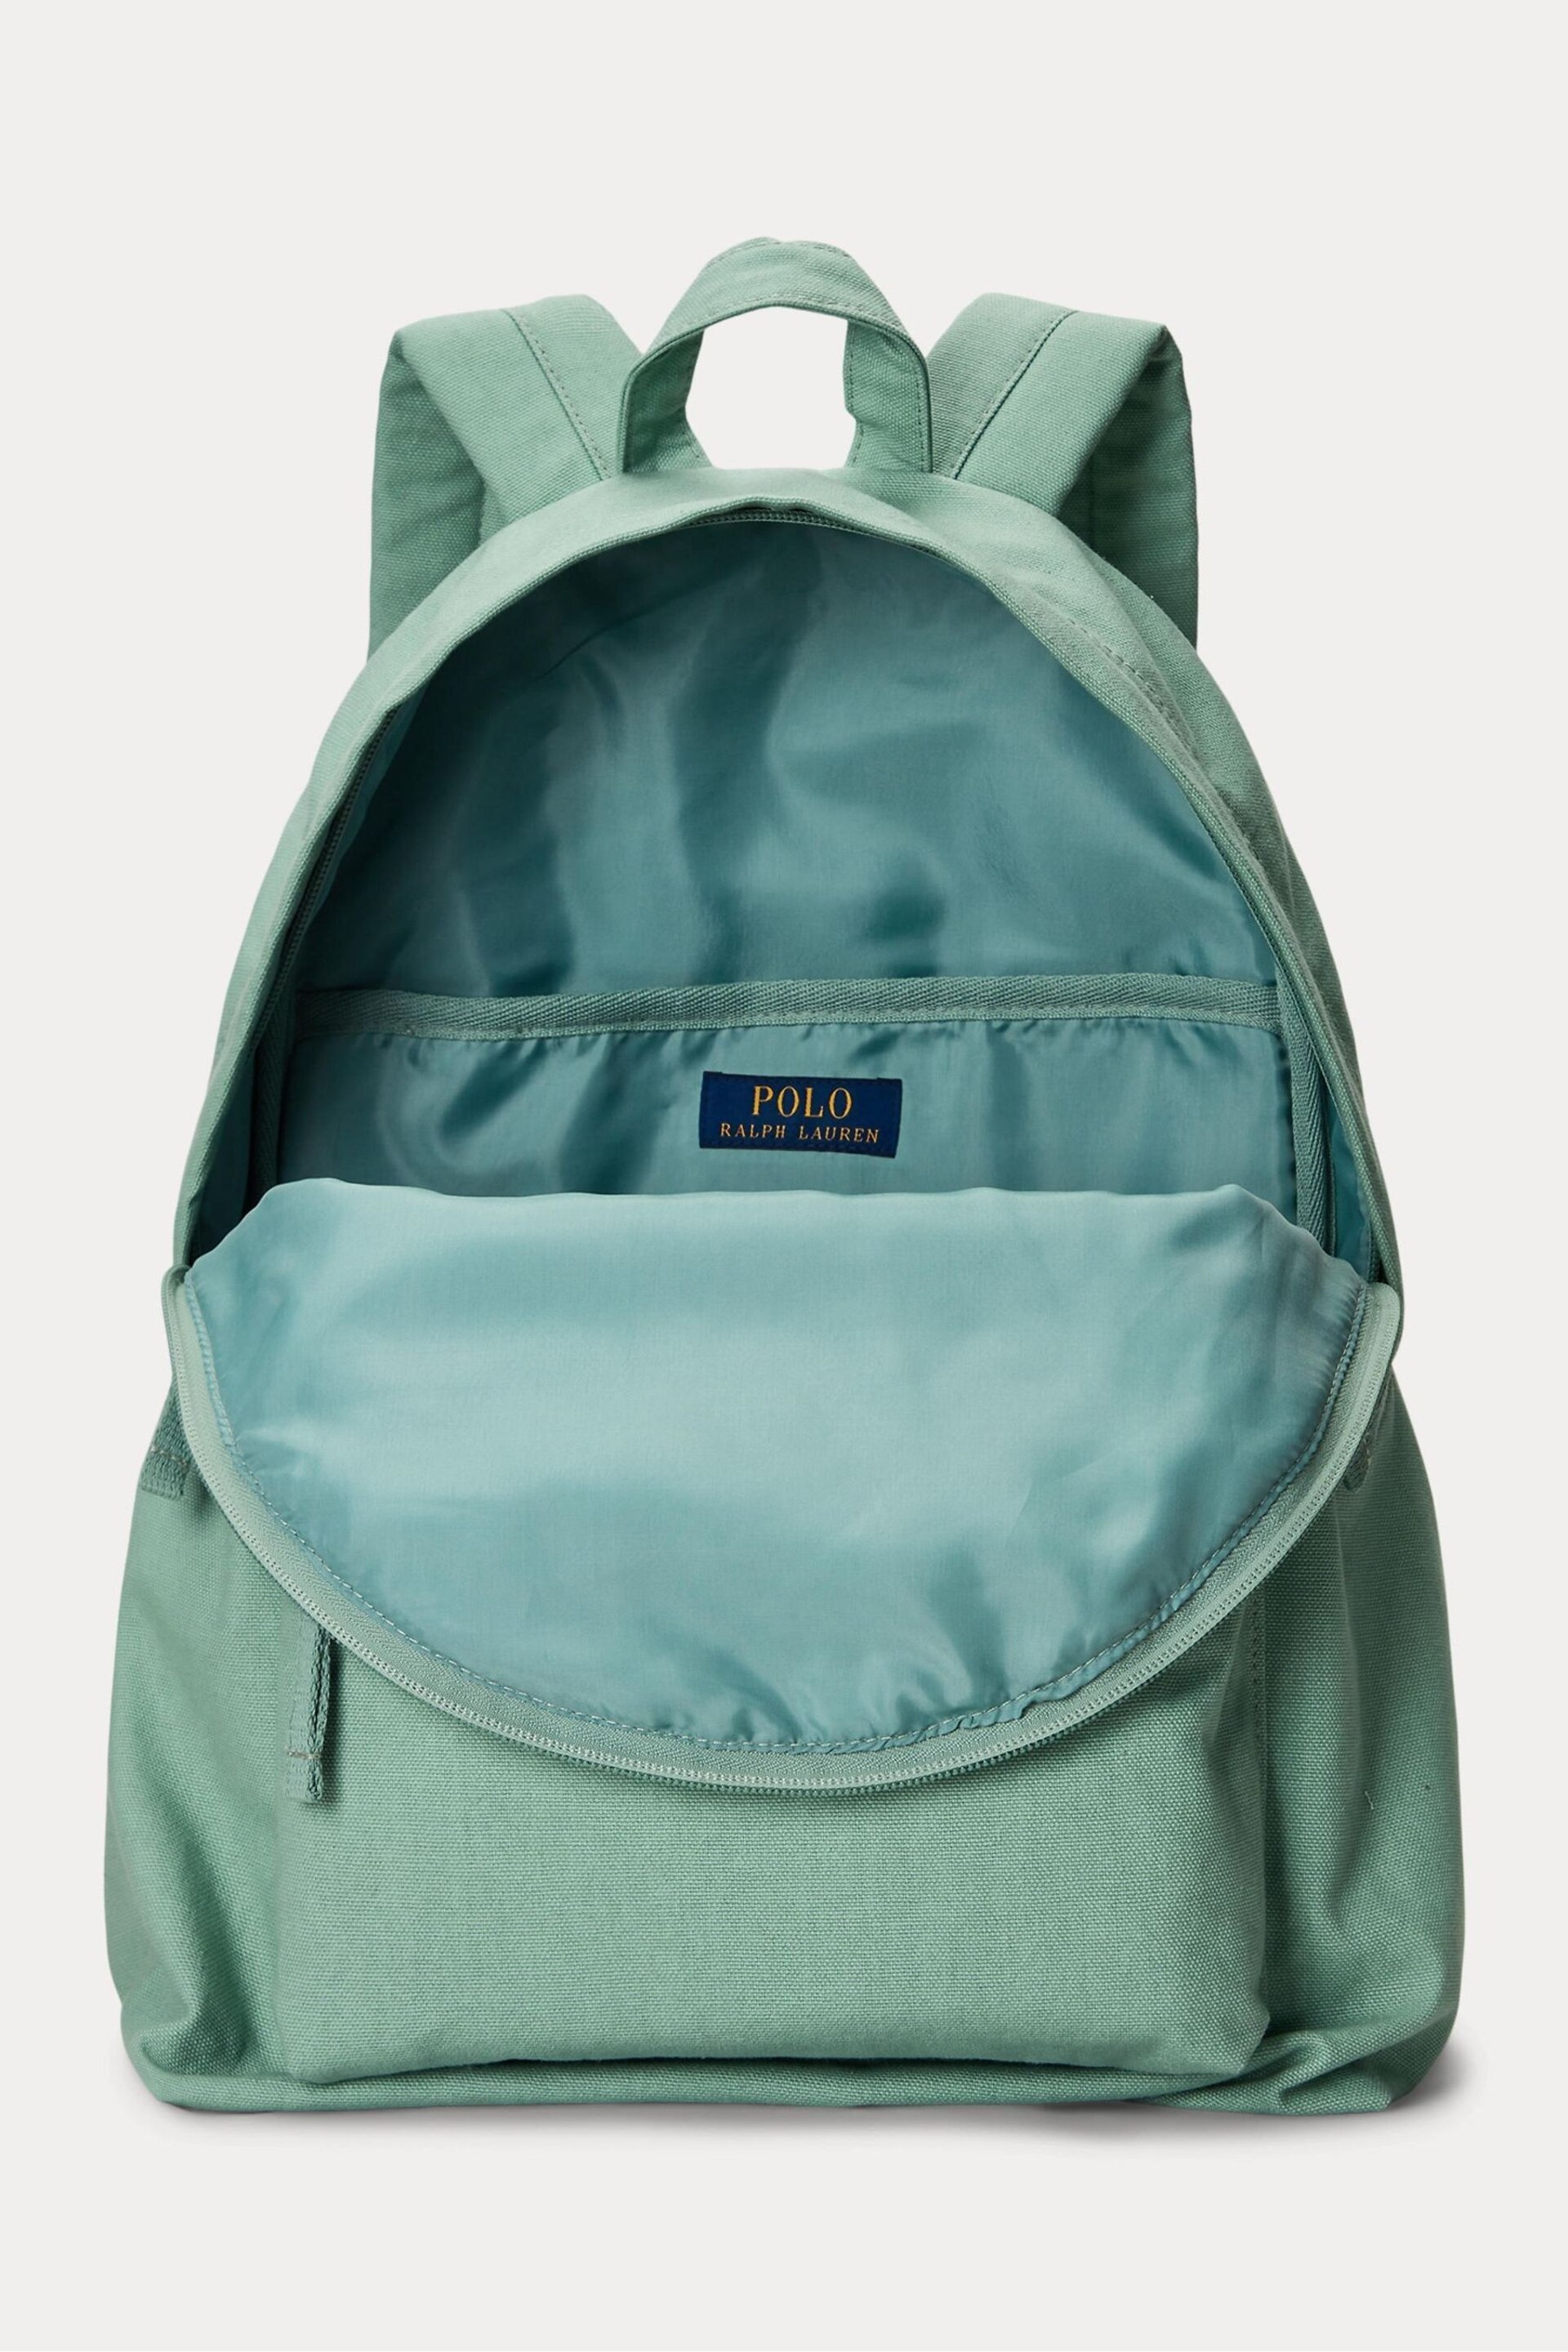 Polo Ralph Lauren Canvas Backpack - Image 4 of 7